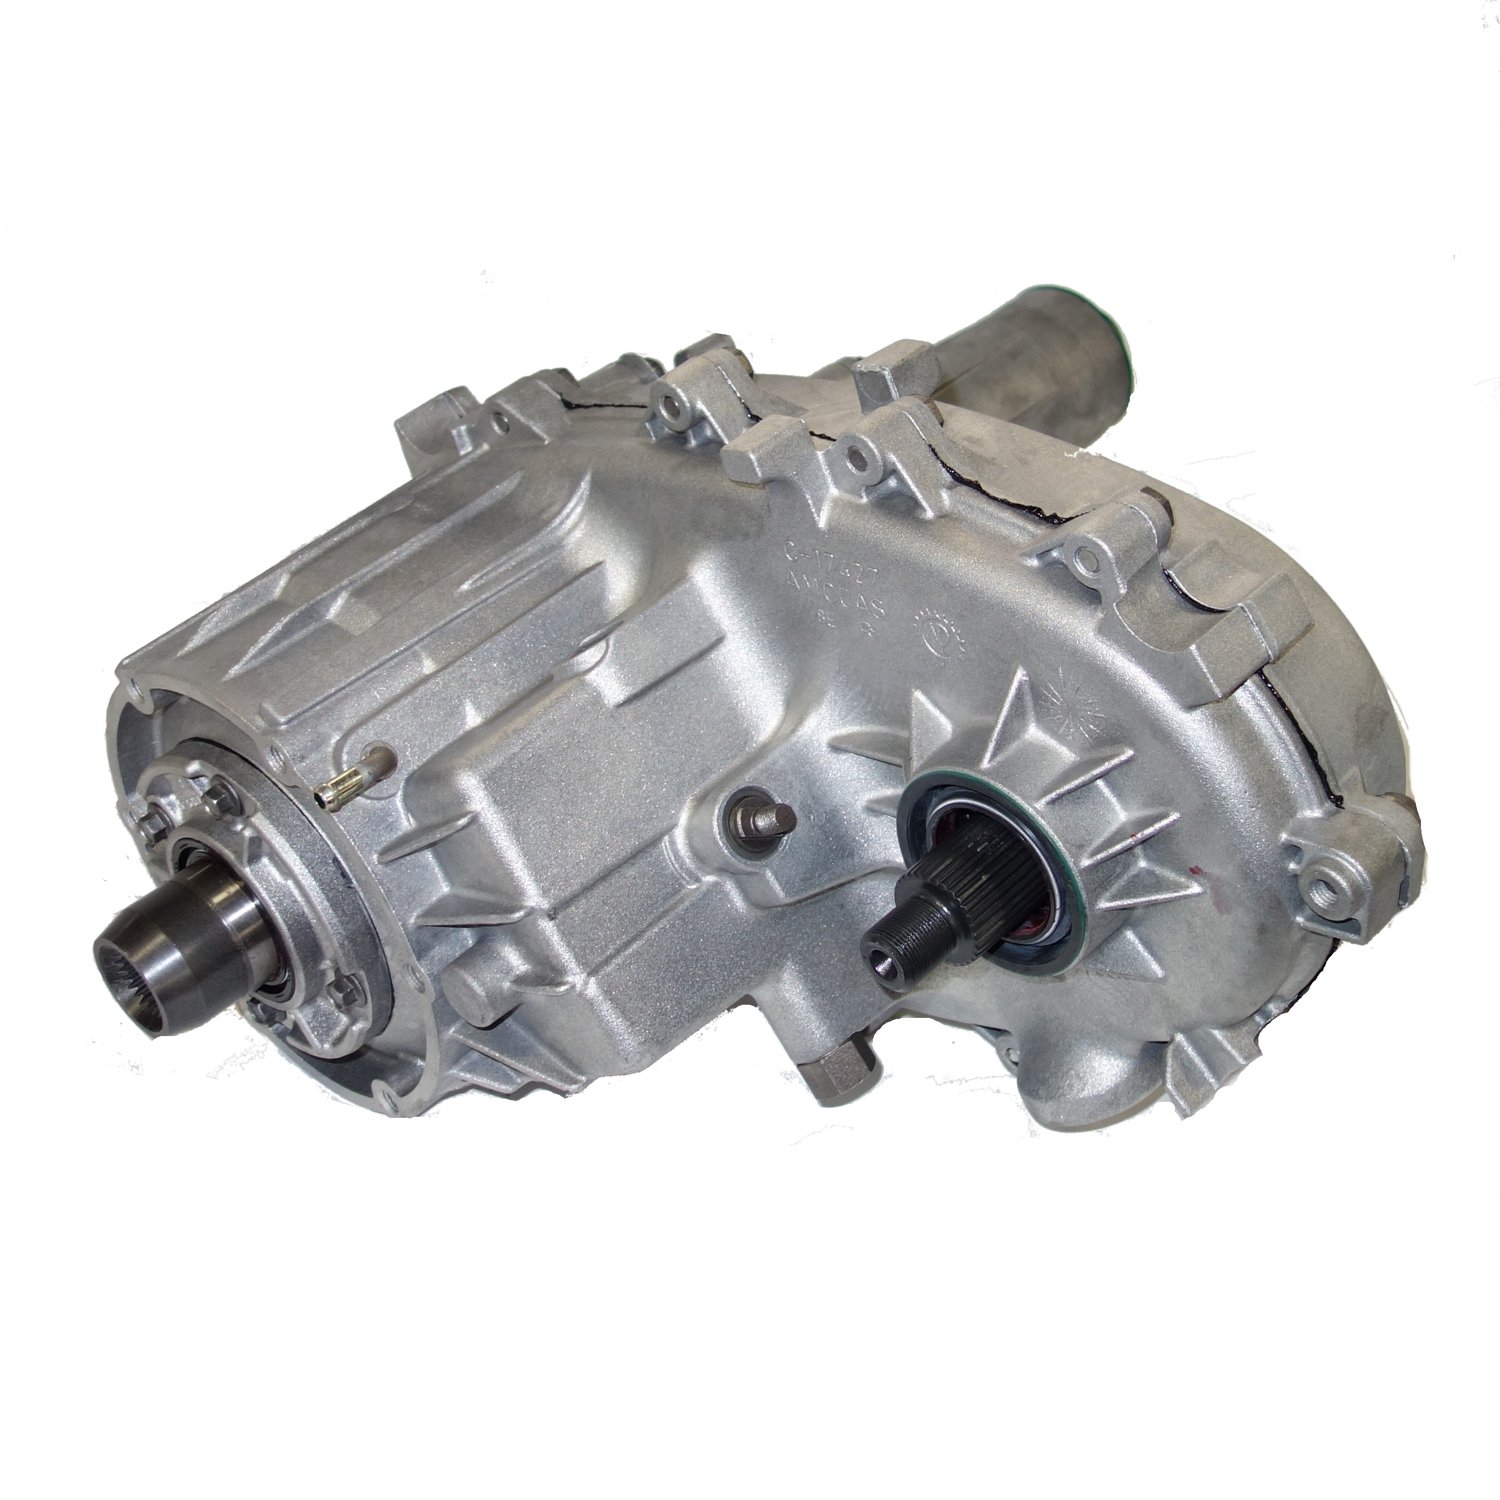 Remanufactured NP241 Transfer Case for GM 88-94 K-series